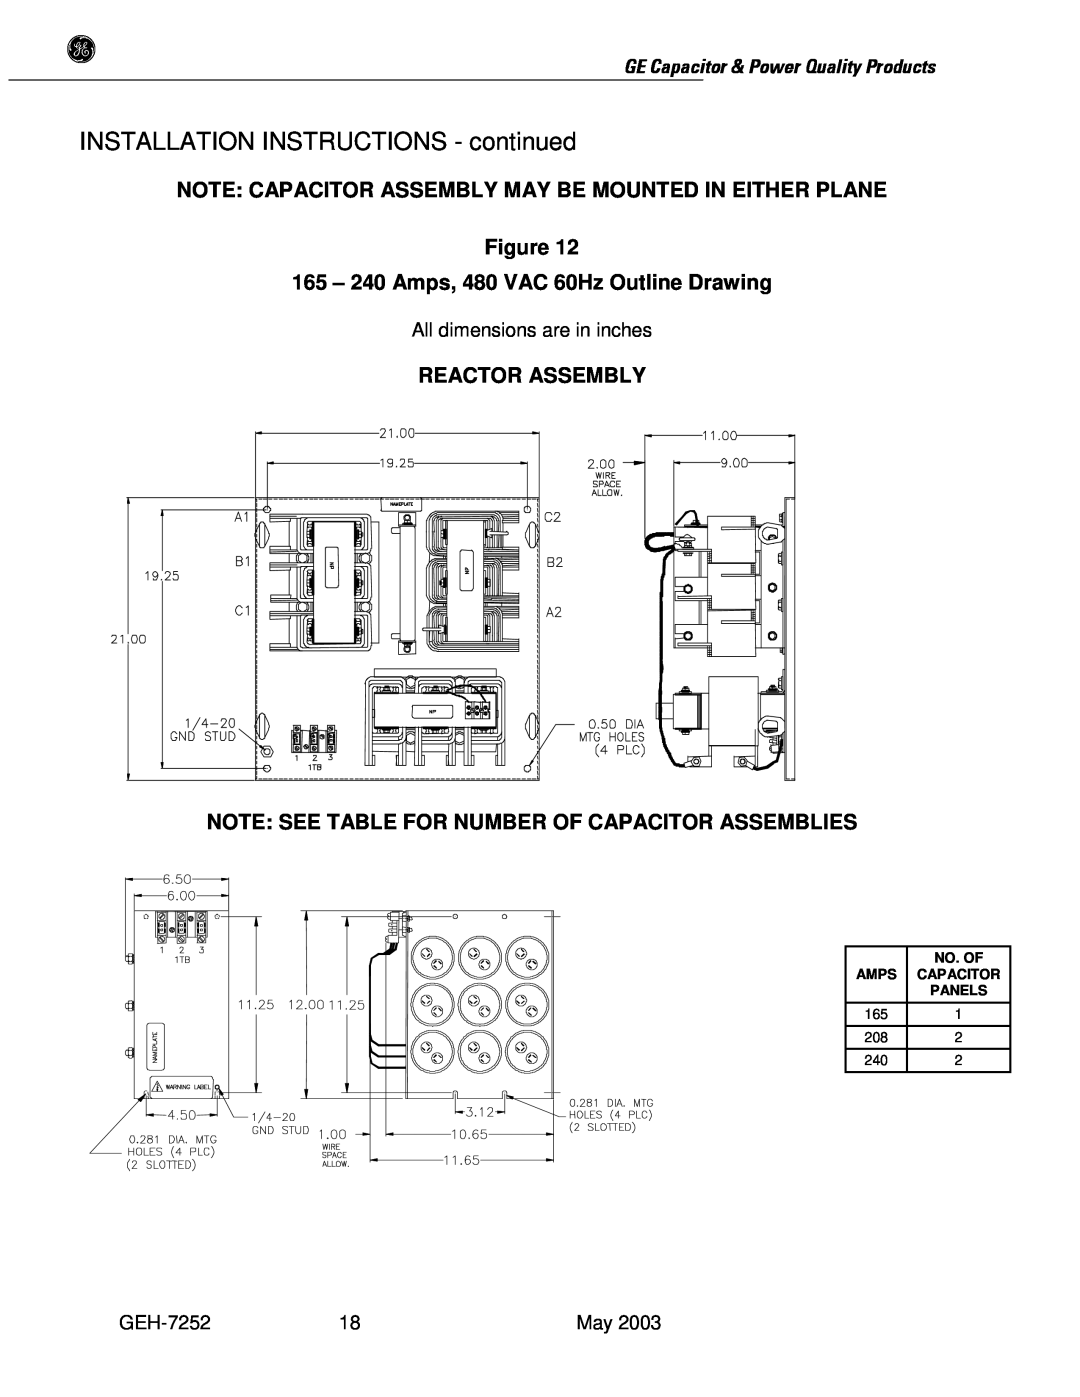 GE SERIES B 480 165 - 240 Amps, 480 VAC 60Hz Outline Drawing, Reactor Assembly, INSTALLATION INSTRUCTIONS - continued 